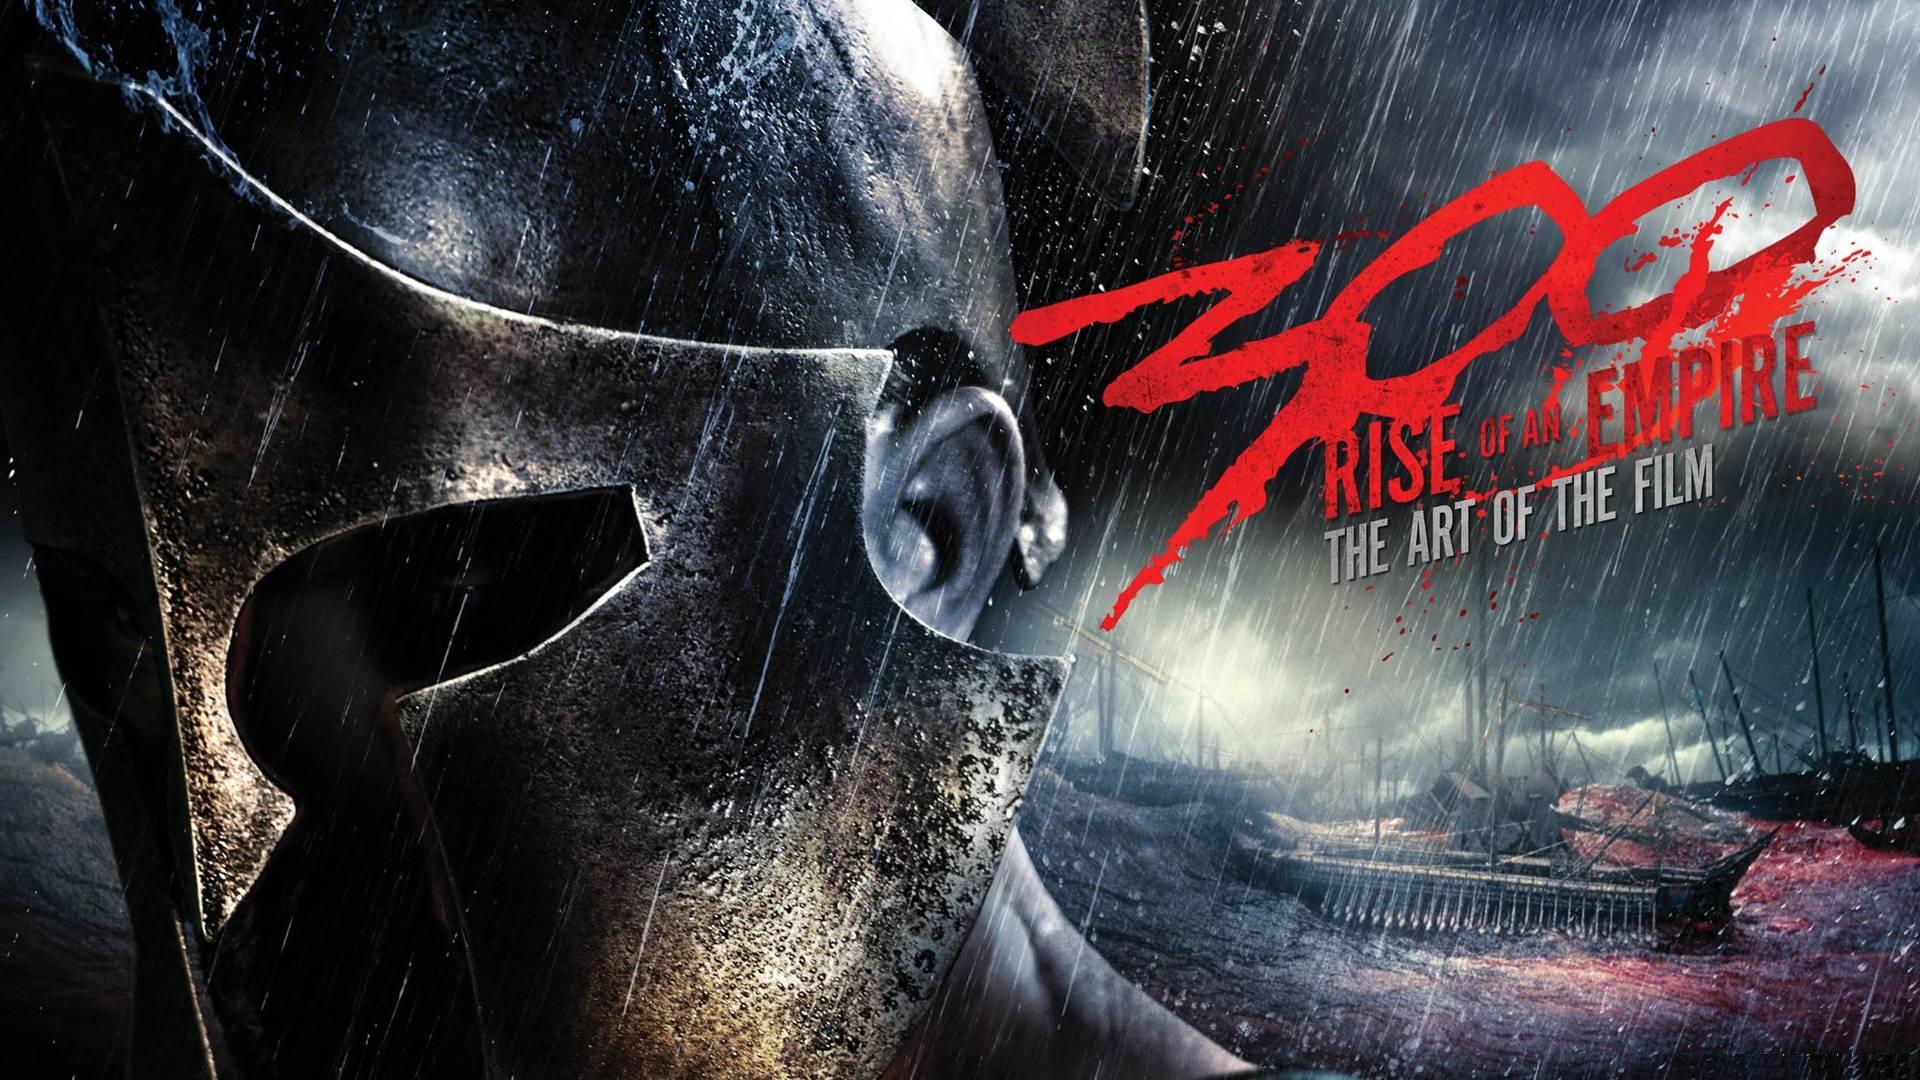 300 Rise Of An Empire Poster Picture Hd Free Download Fabulous Hd Wallpaper Of Hollywood Movies